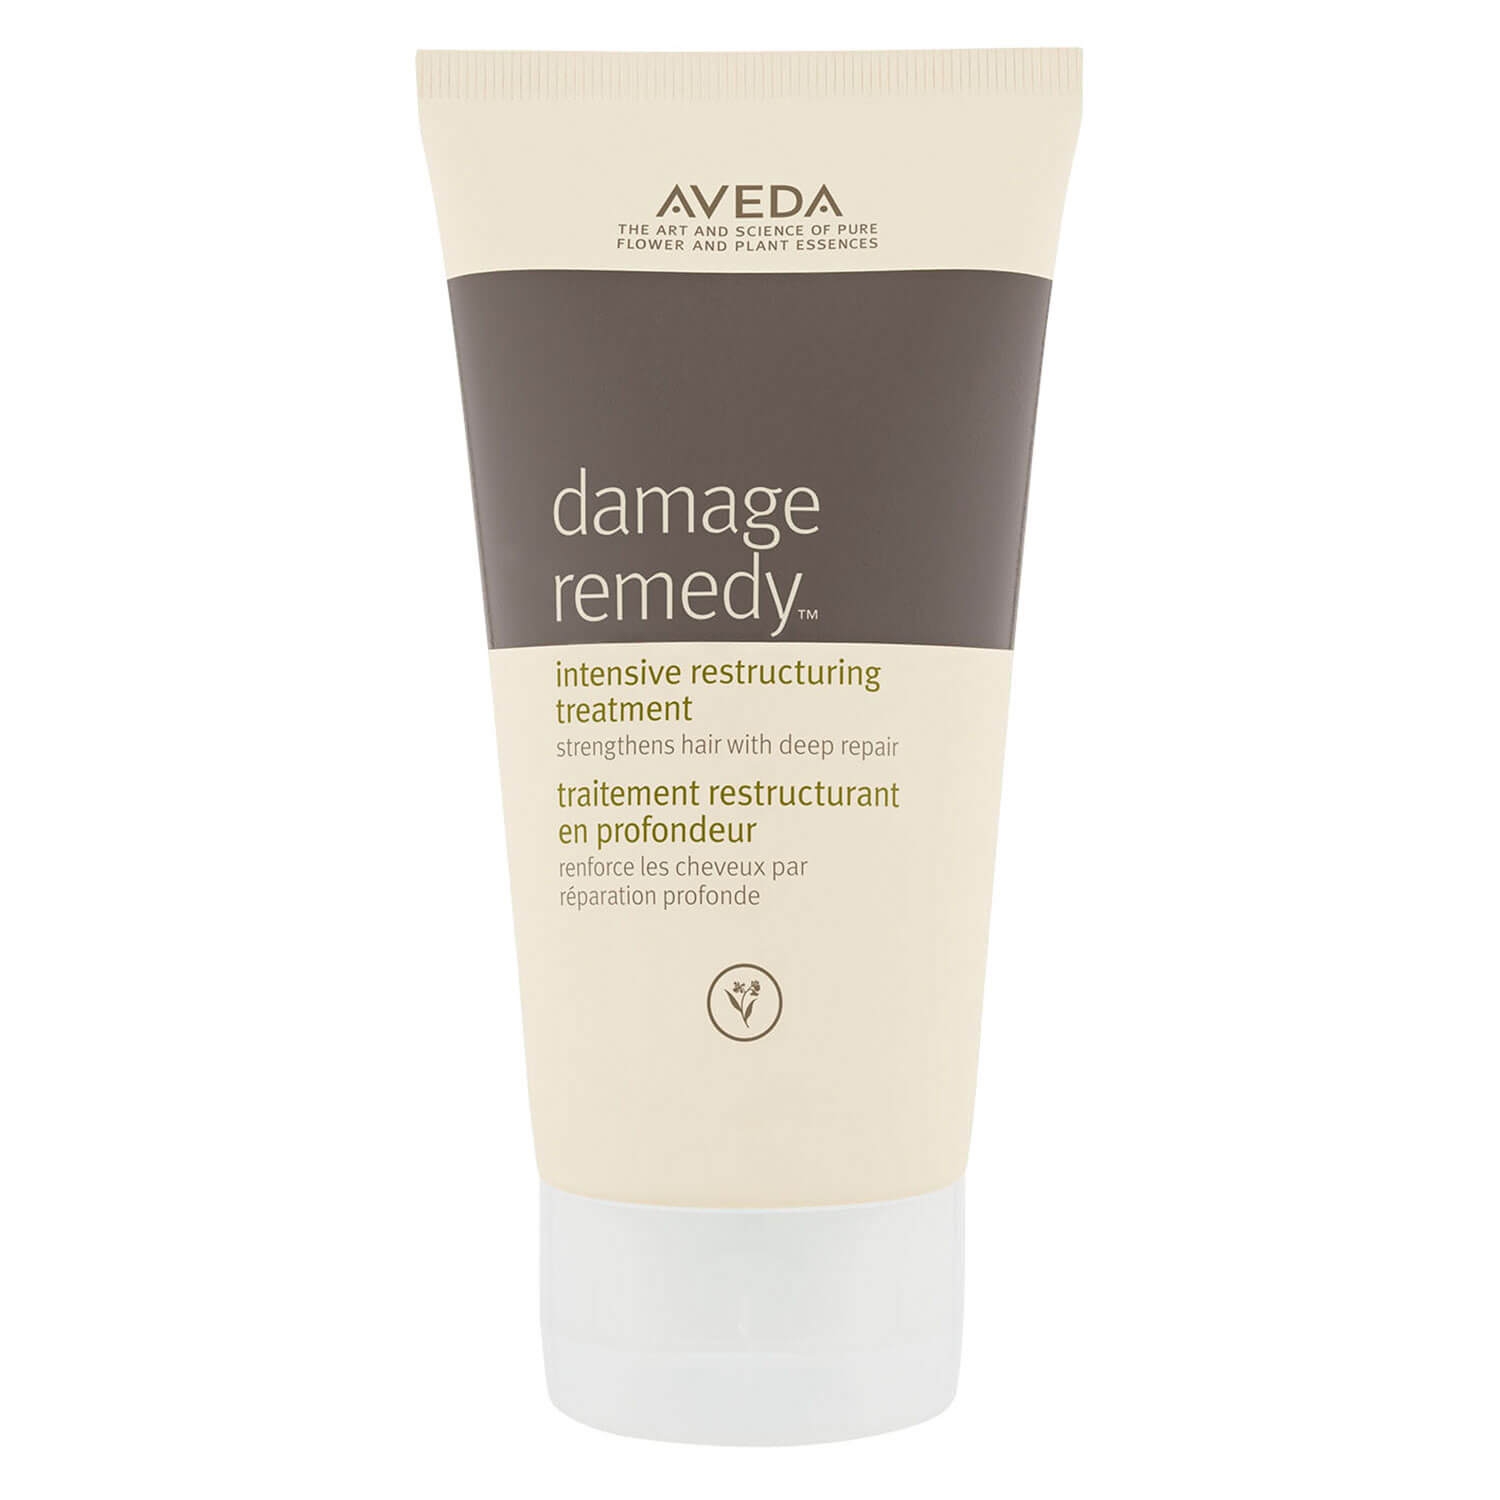 Product image from damage remedy - intensive restructuring treatment